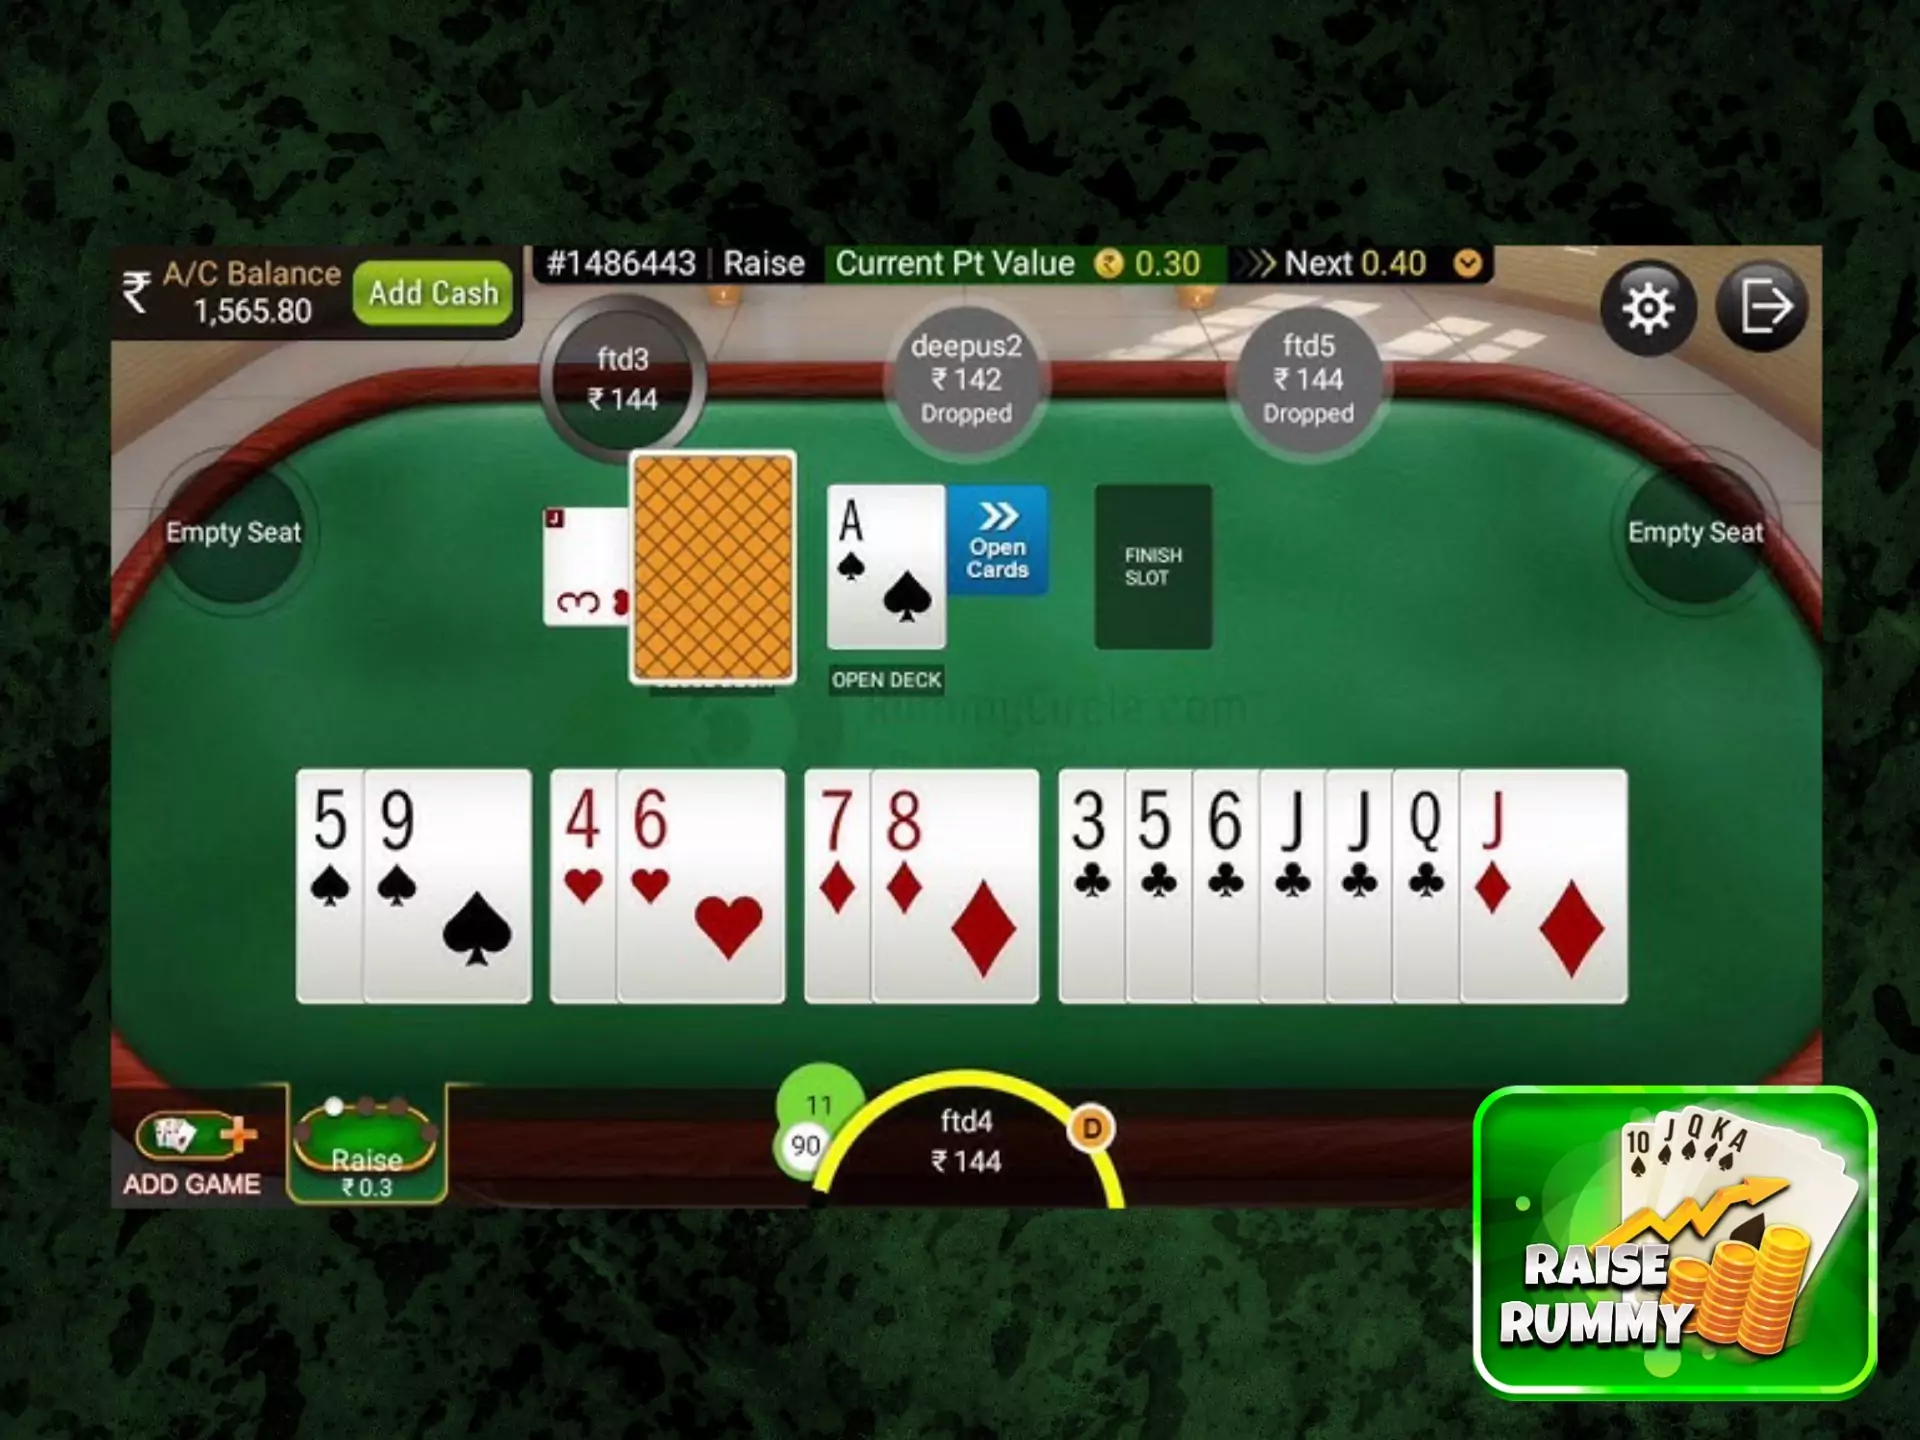 Play this kind of rummy at an Indian online casino.